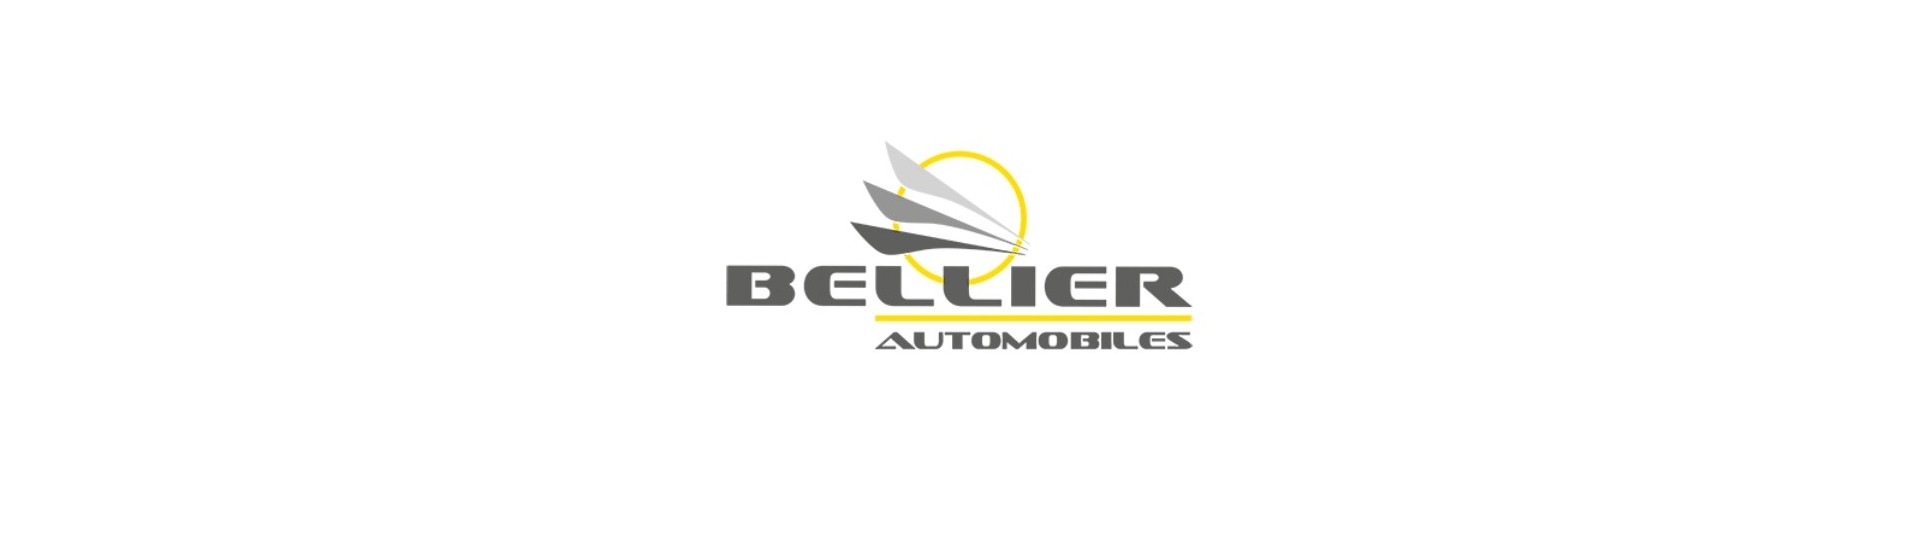 Door window at the best price for car without a permit Bellier